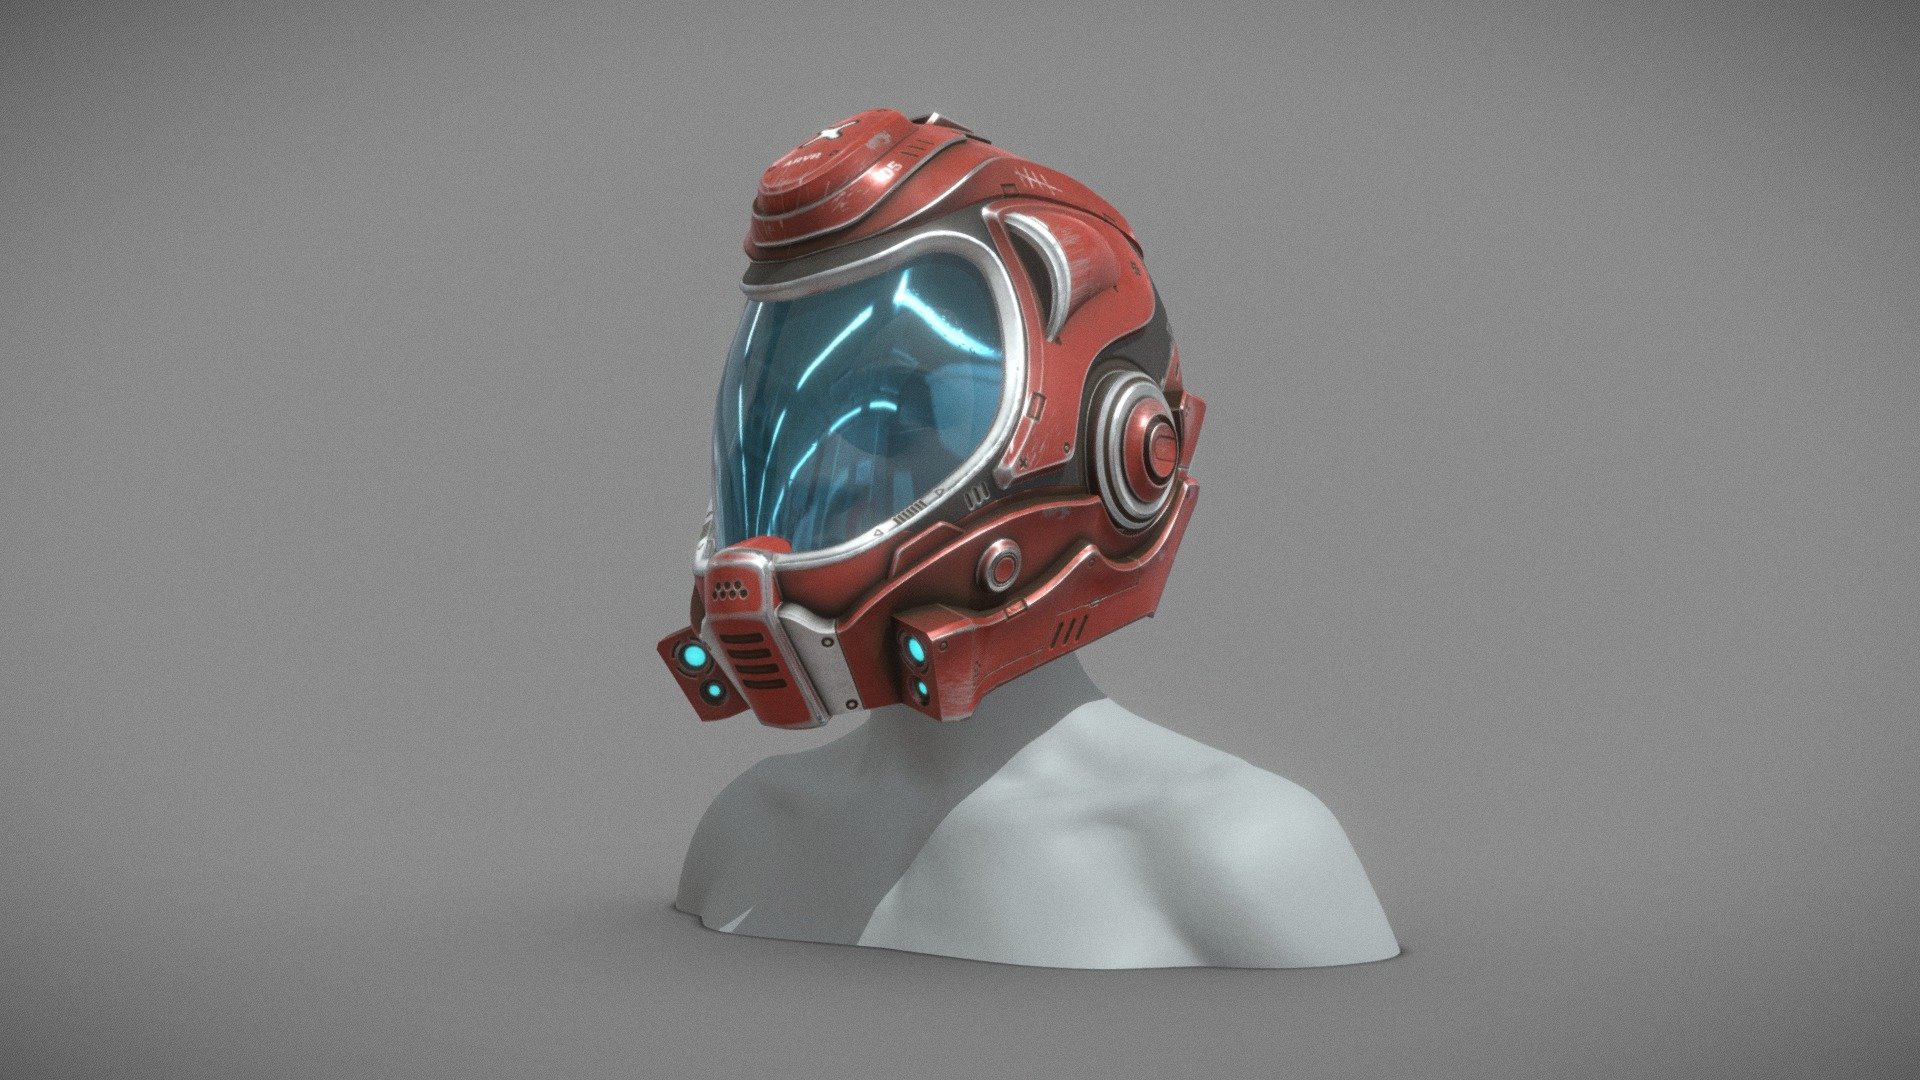 I don't get a chance to do too many scifi helmet concepts so this one was a lot of fun to make. 
The helmet itself is production ready. The bust is a high poly just for staging 3d model